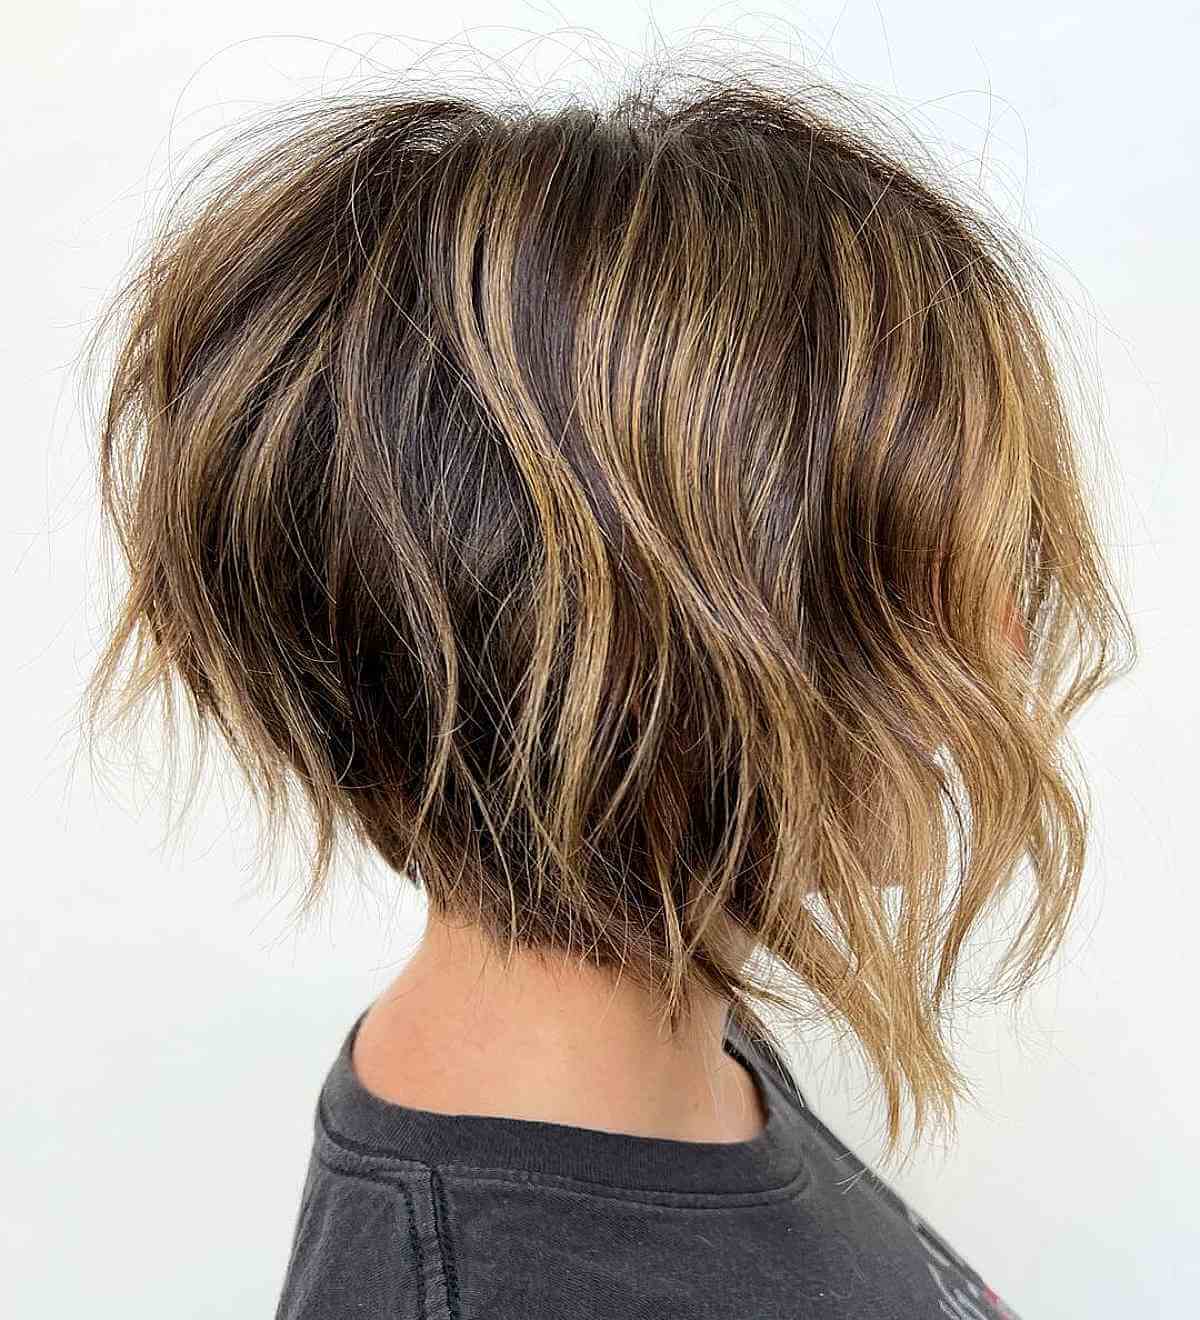 Short Tousled Waves with Blonde Balayage on a Graduated Bob